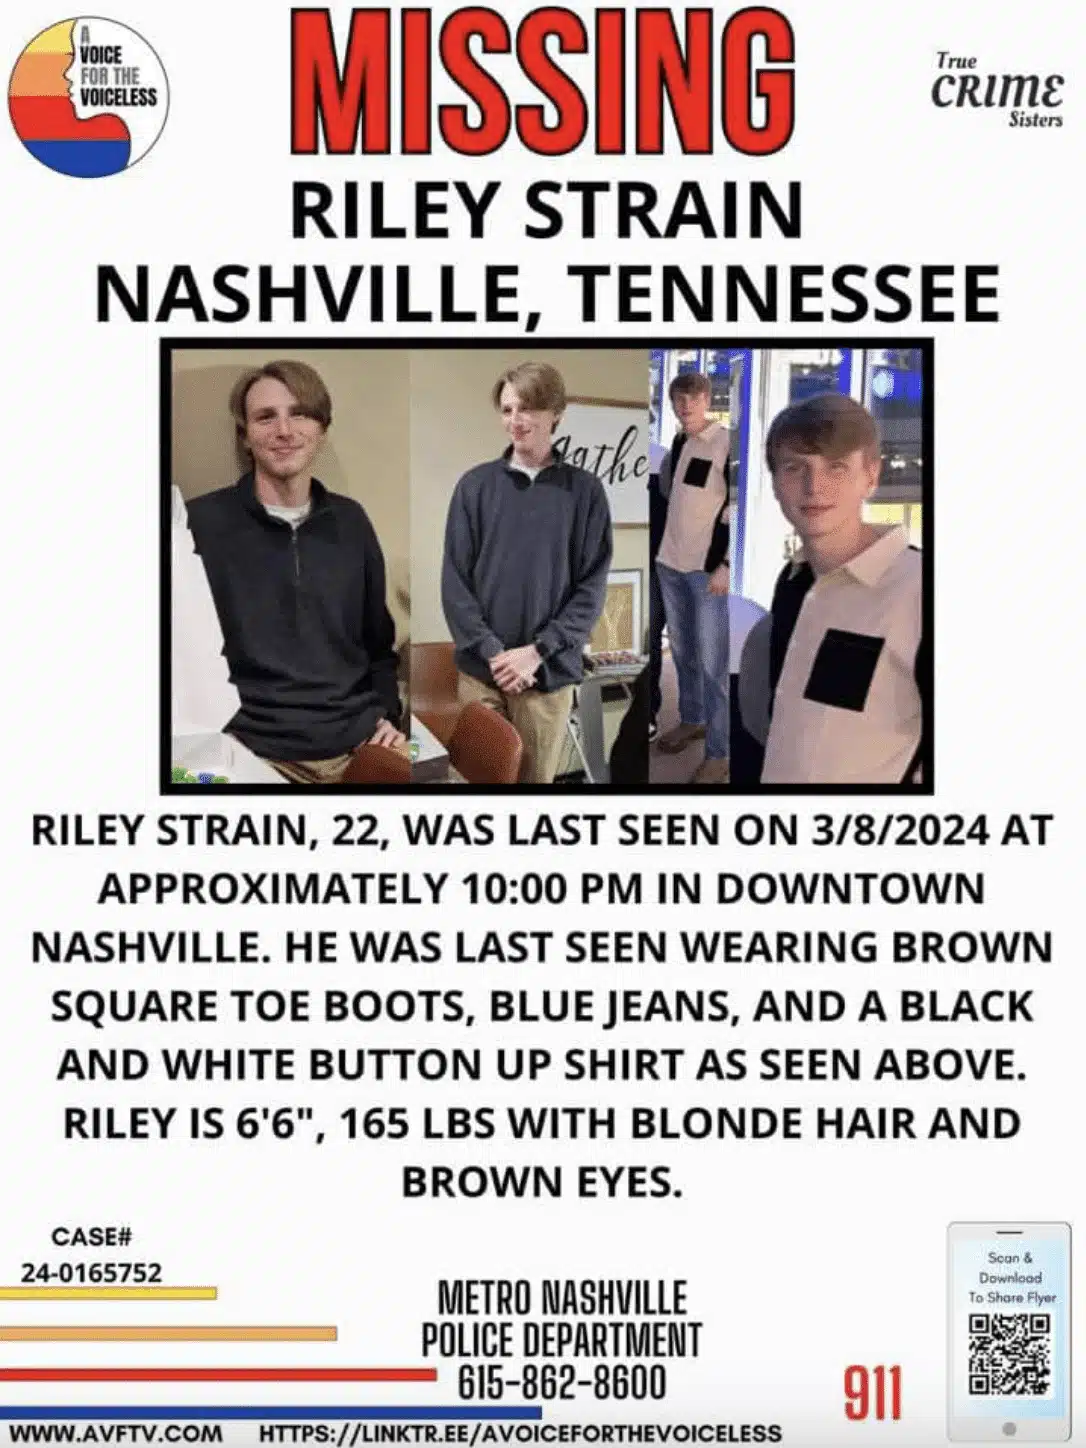 The missing poster for Riley Strain